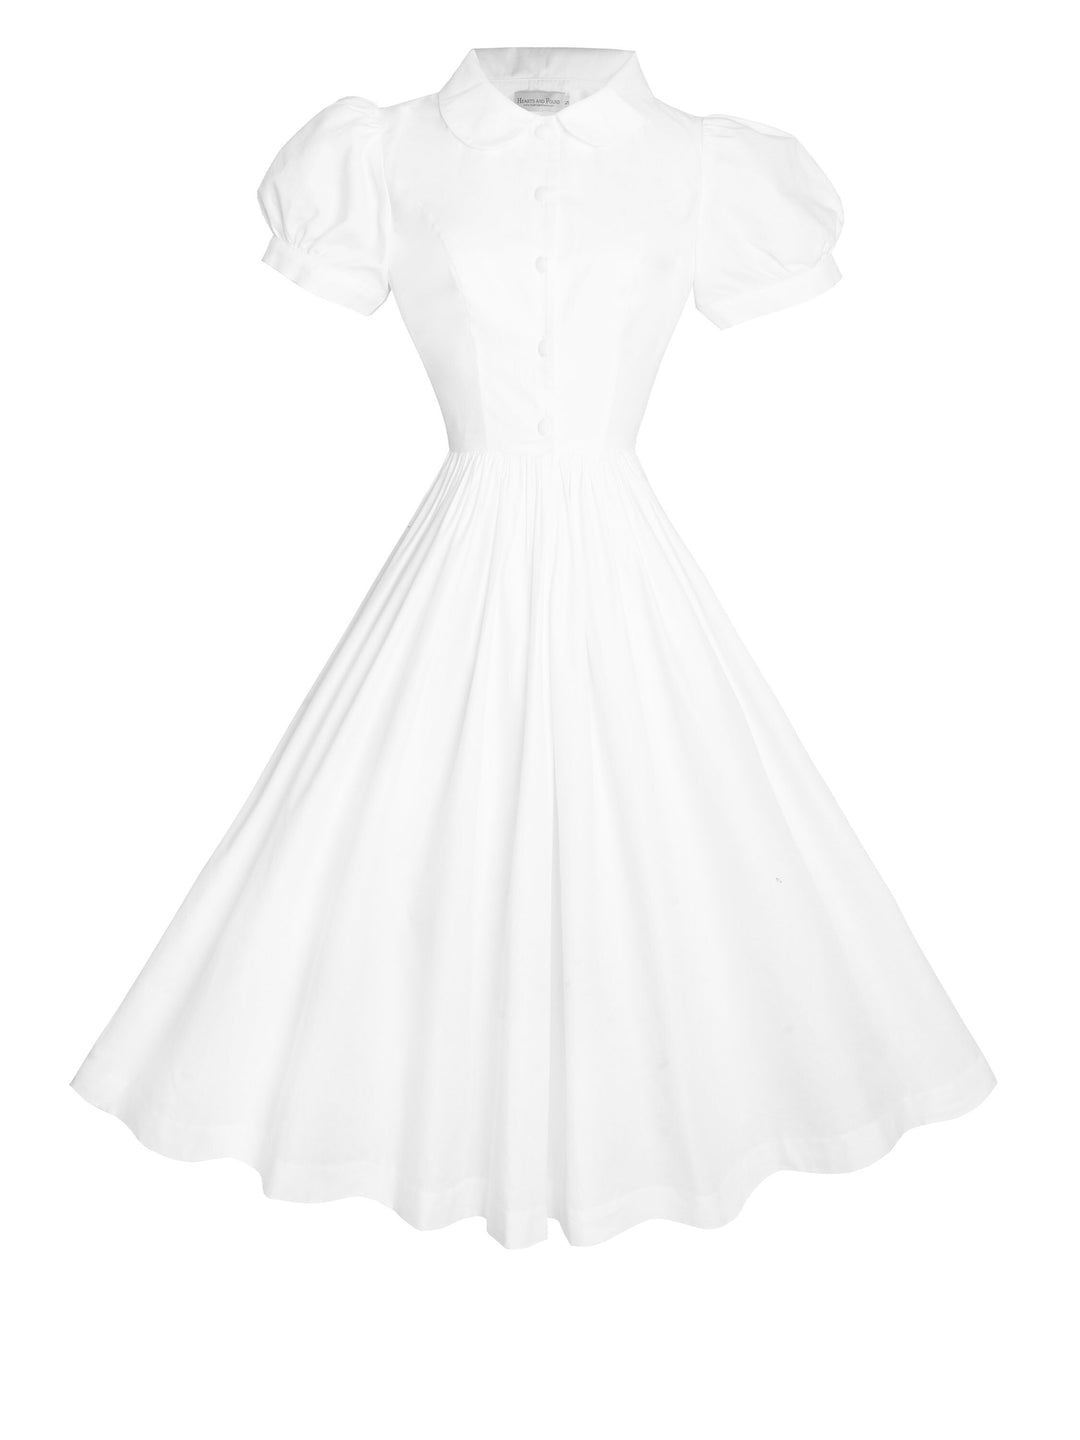 RTS - Size S - Amelie Dress in White Cotton